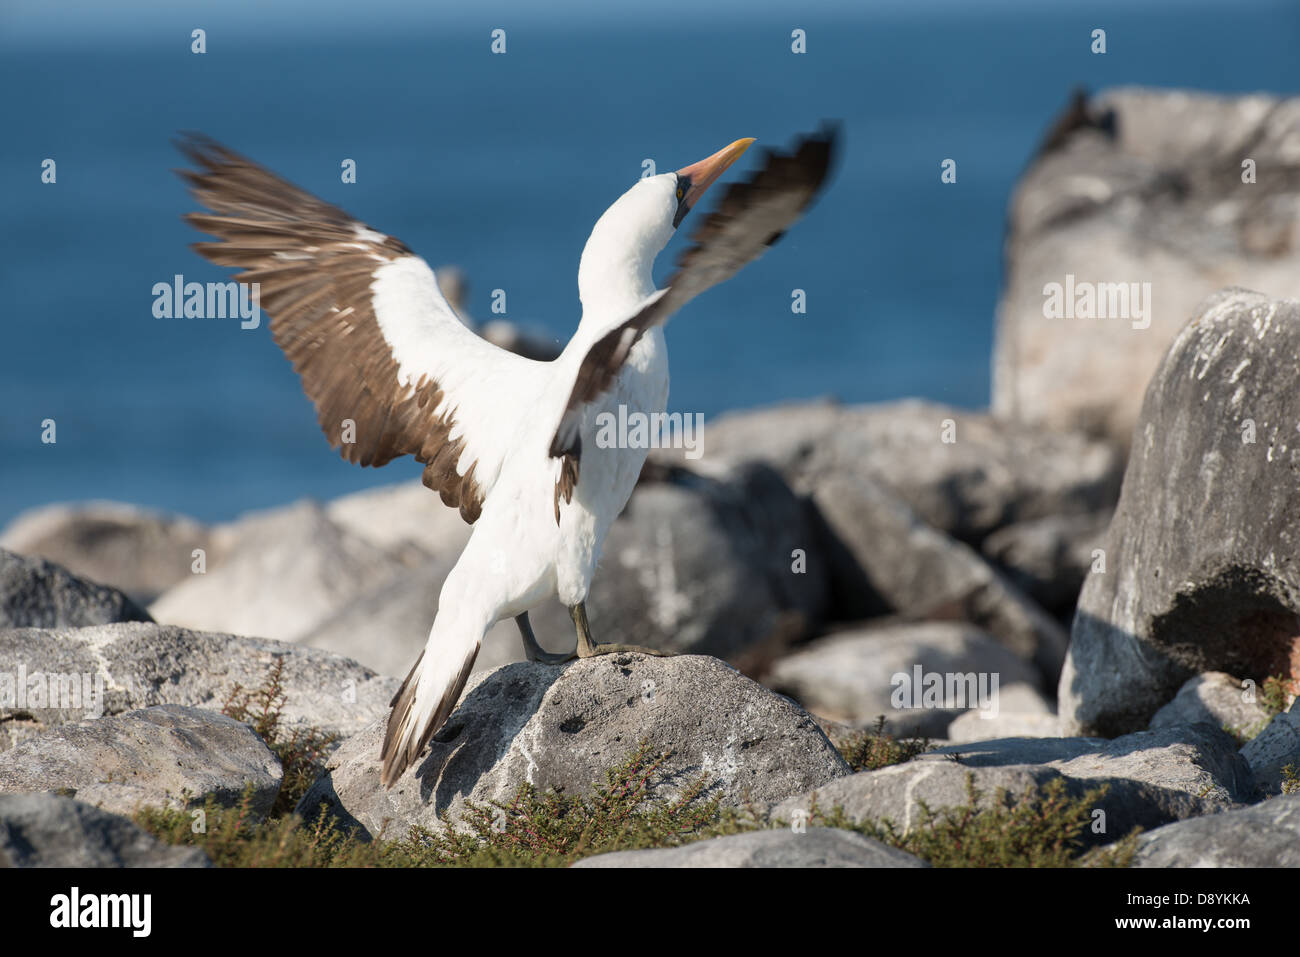 Stock photo of a Nazca booby standing on a rock flapping his wings. Stock Photo